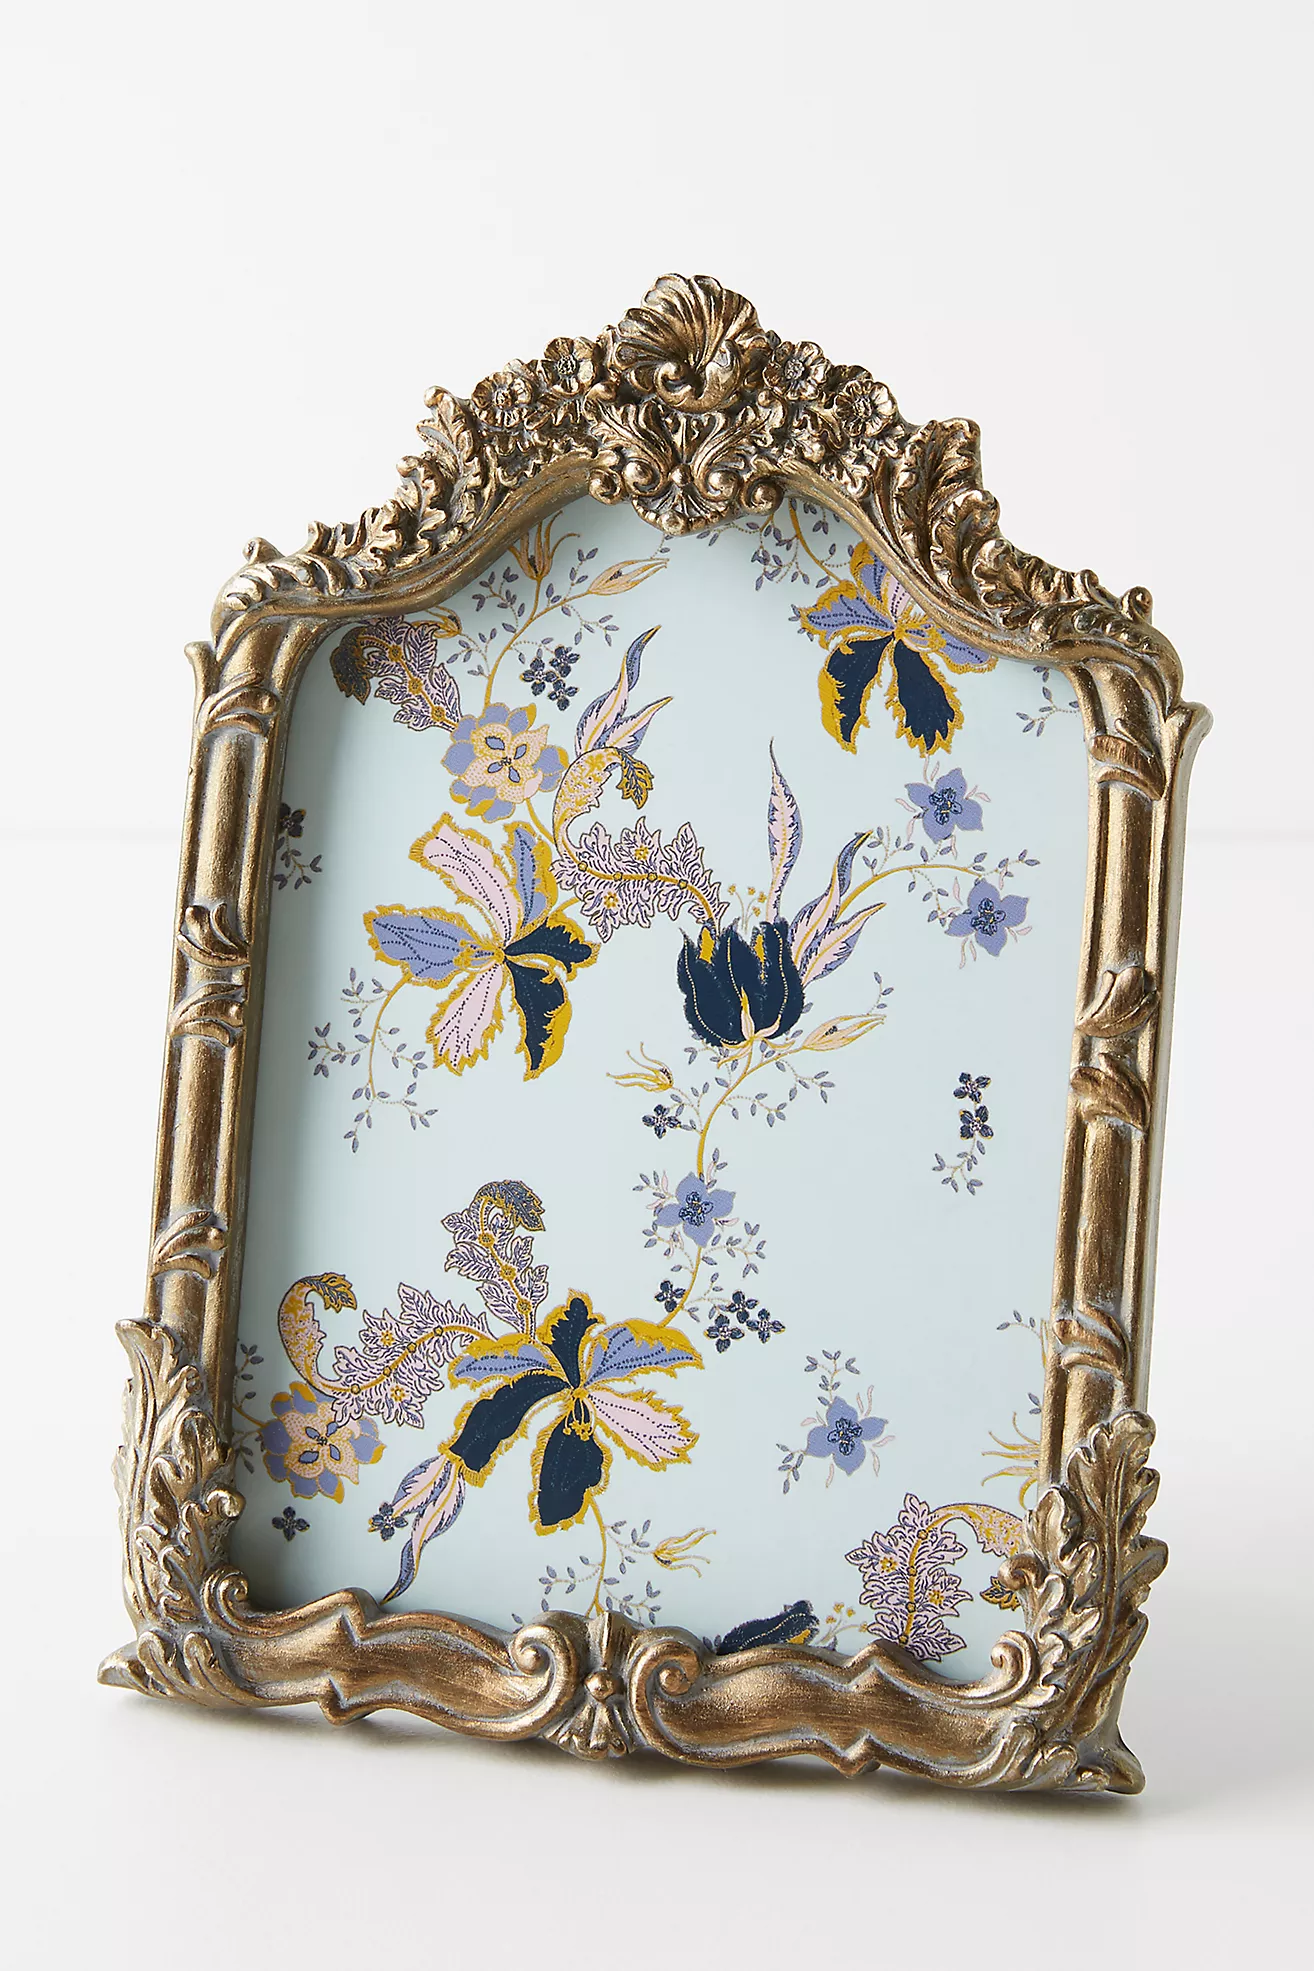 Shop Victoria Frame from Anthropologie on Openhaus